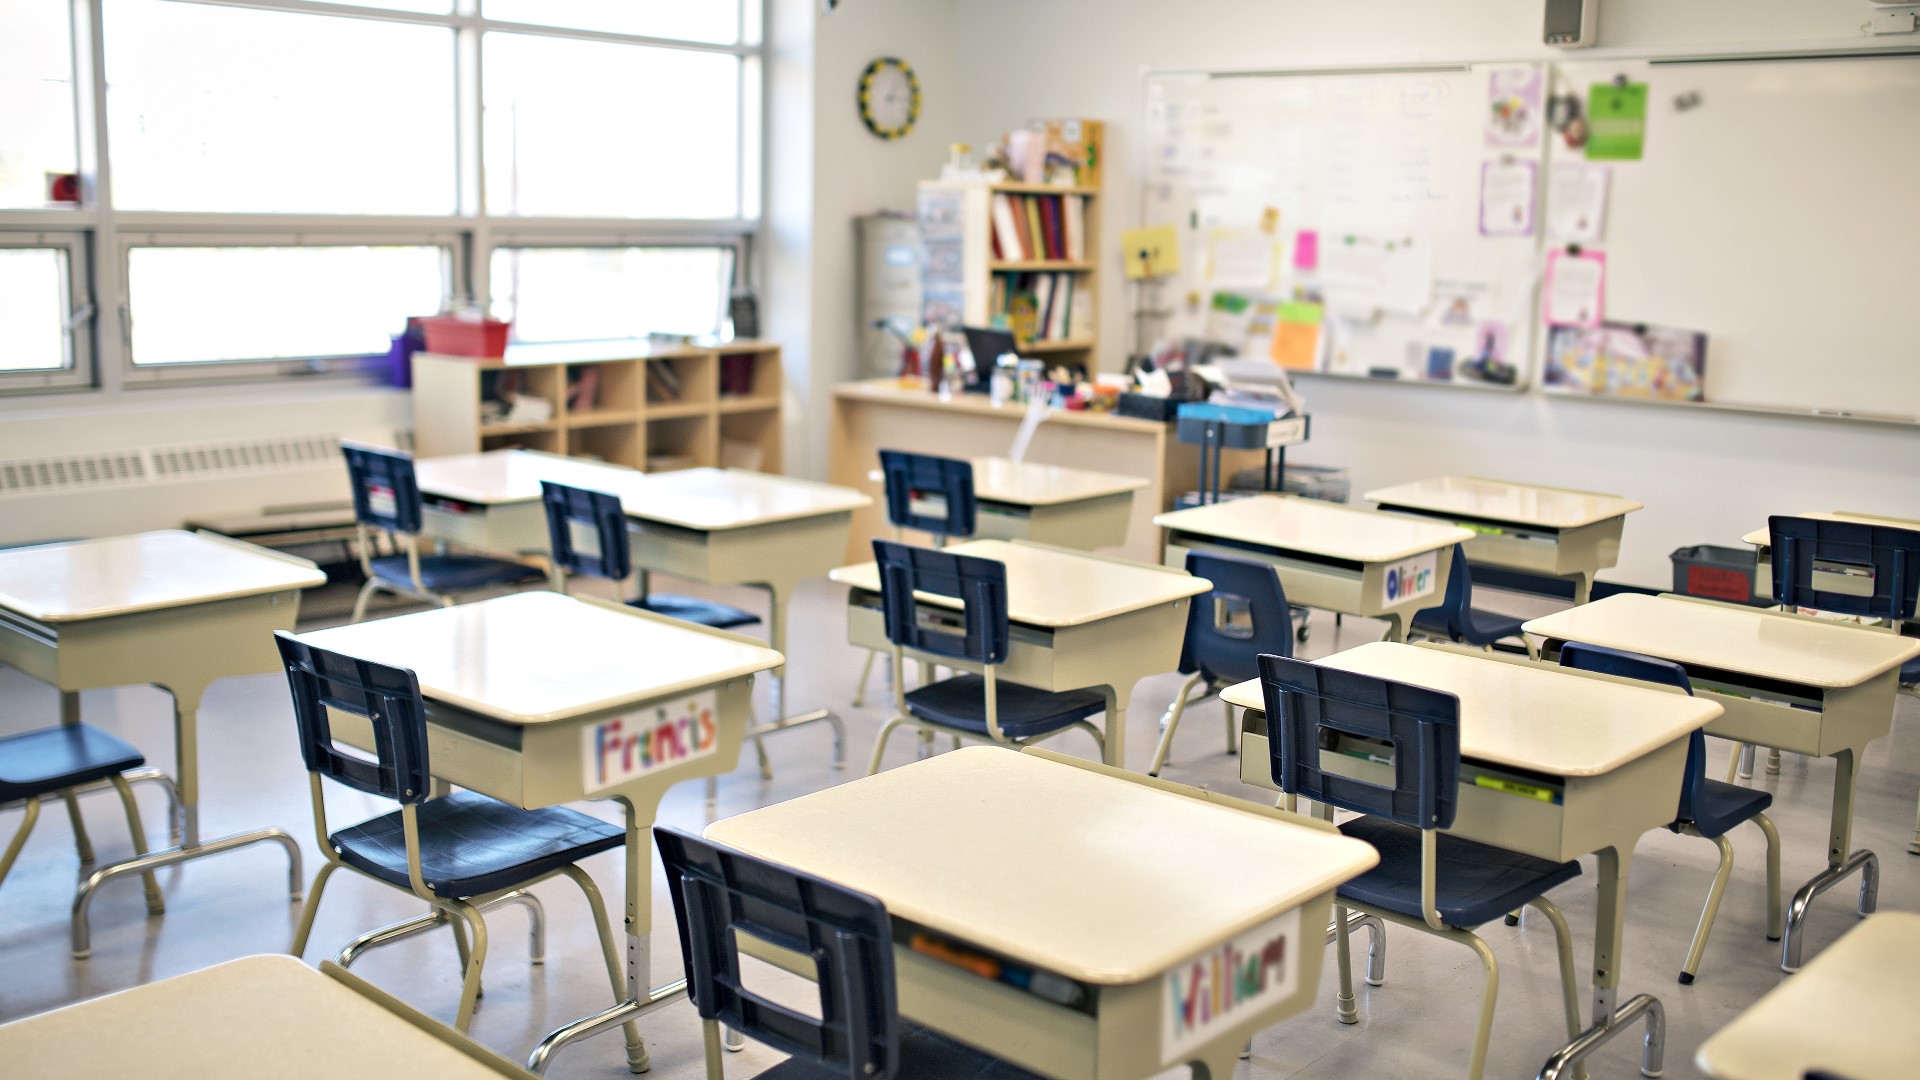 North Carolina law requires teachers to comply with state-mandated class size ratios. Some changes have already happened in Guilford County.